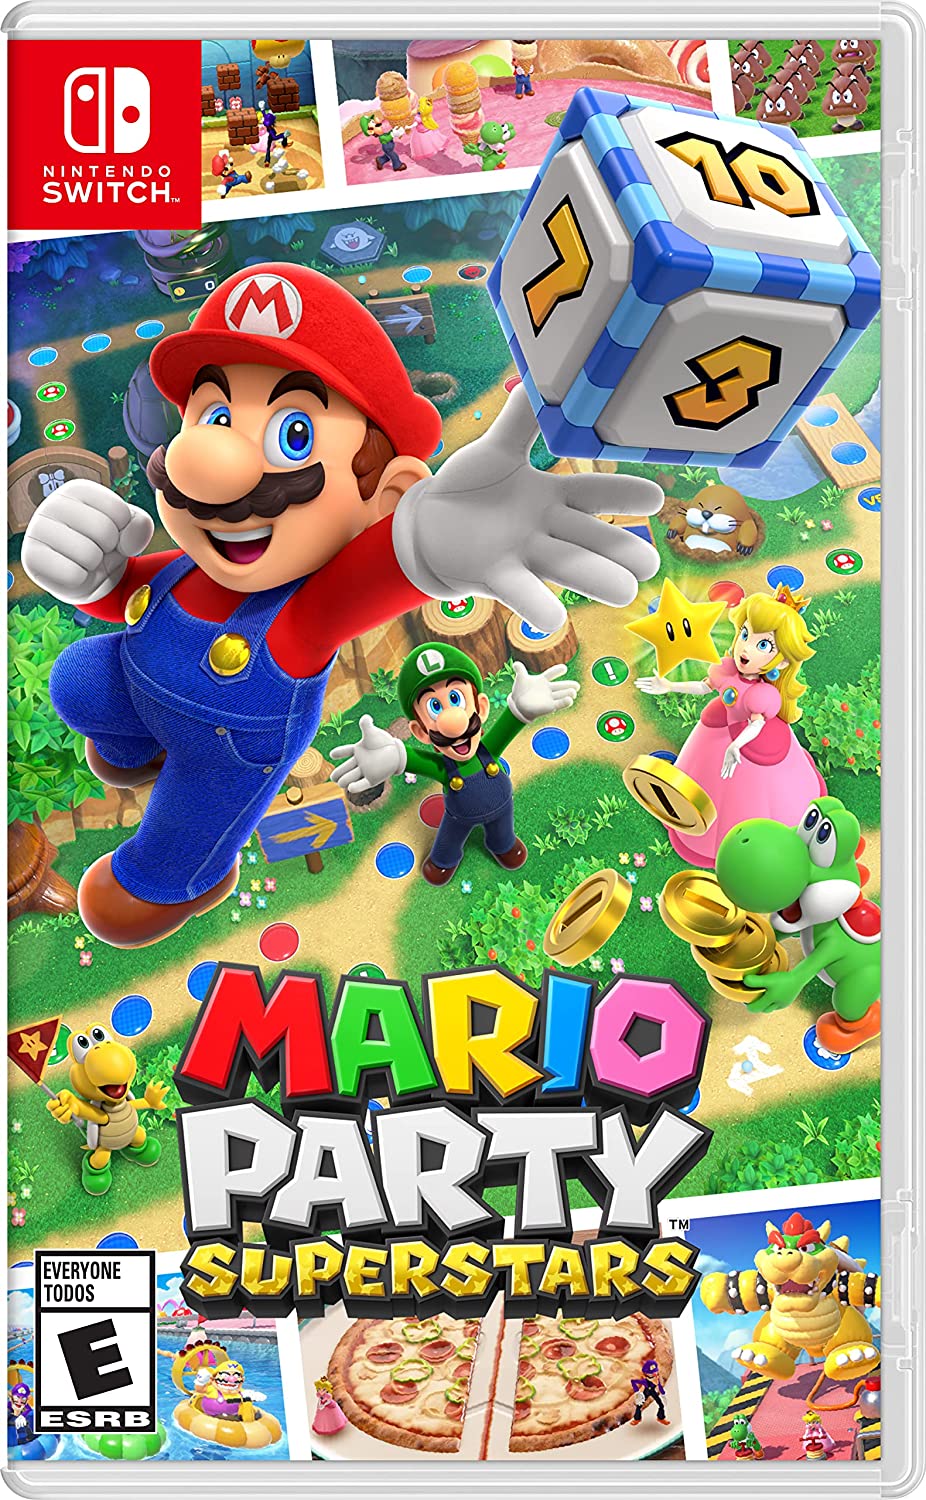 Mario Party Superstars cover artwork for Nintendo Switch.